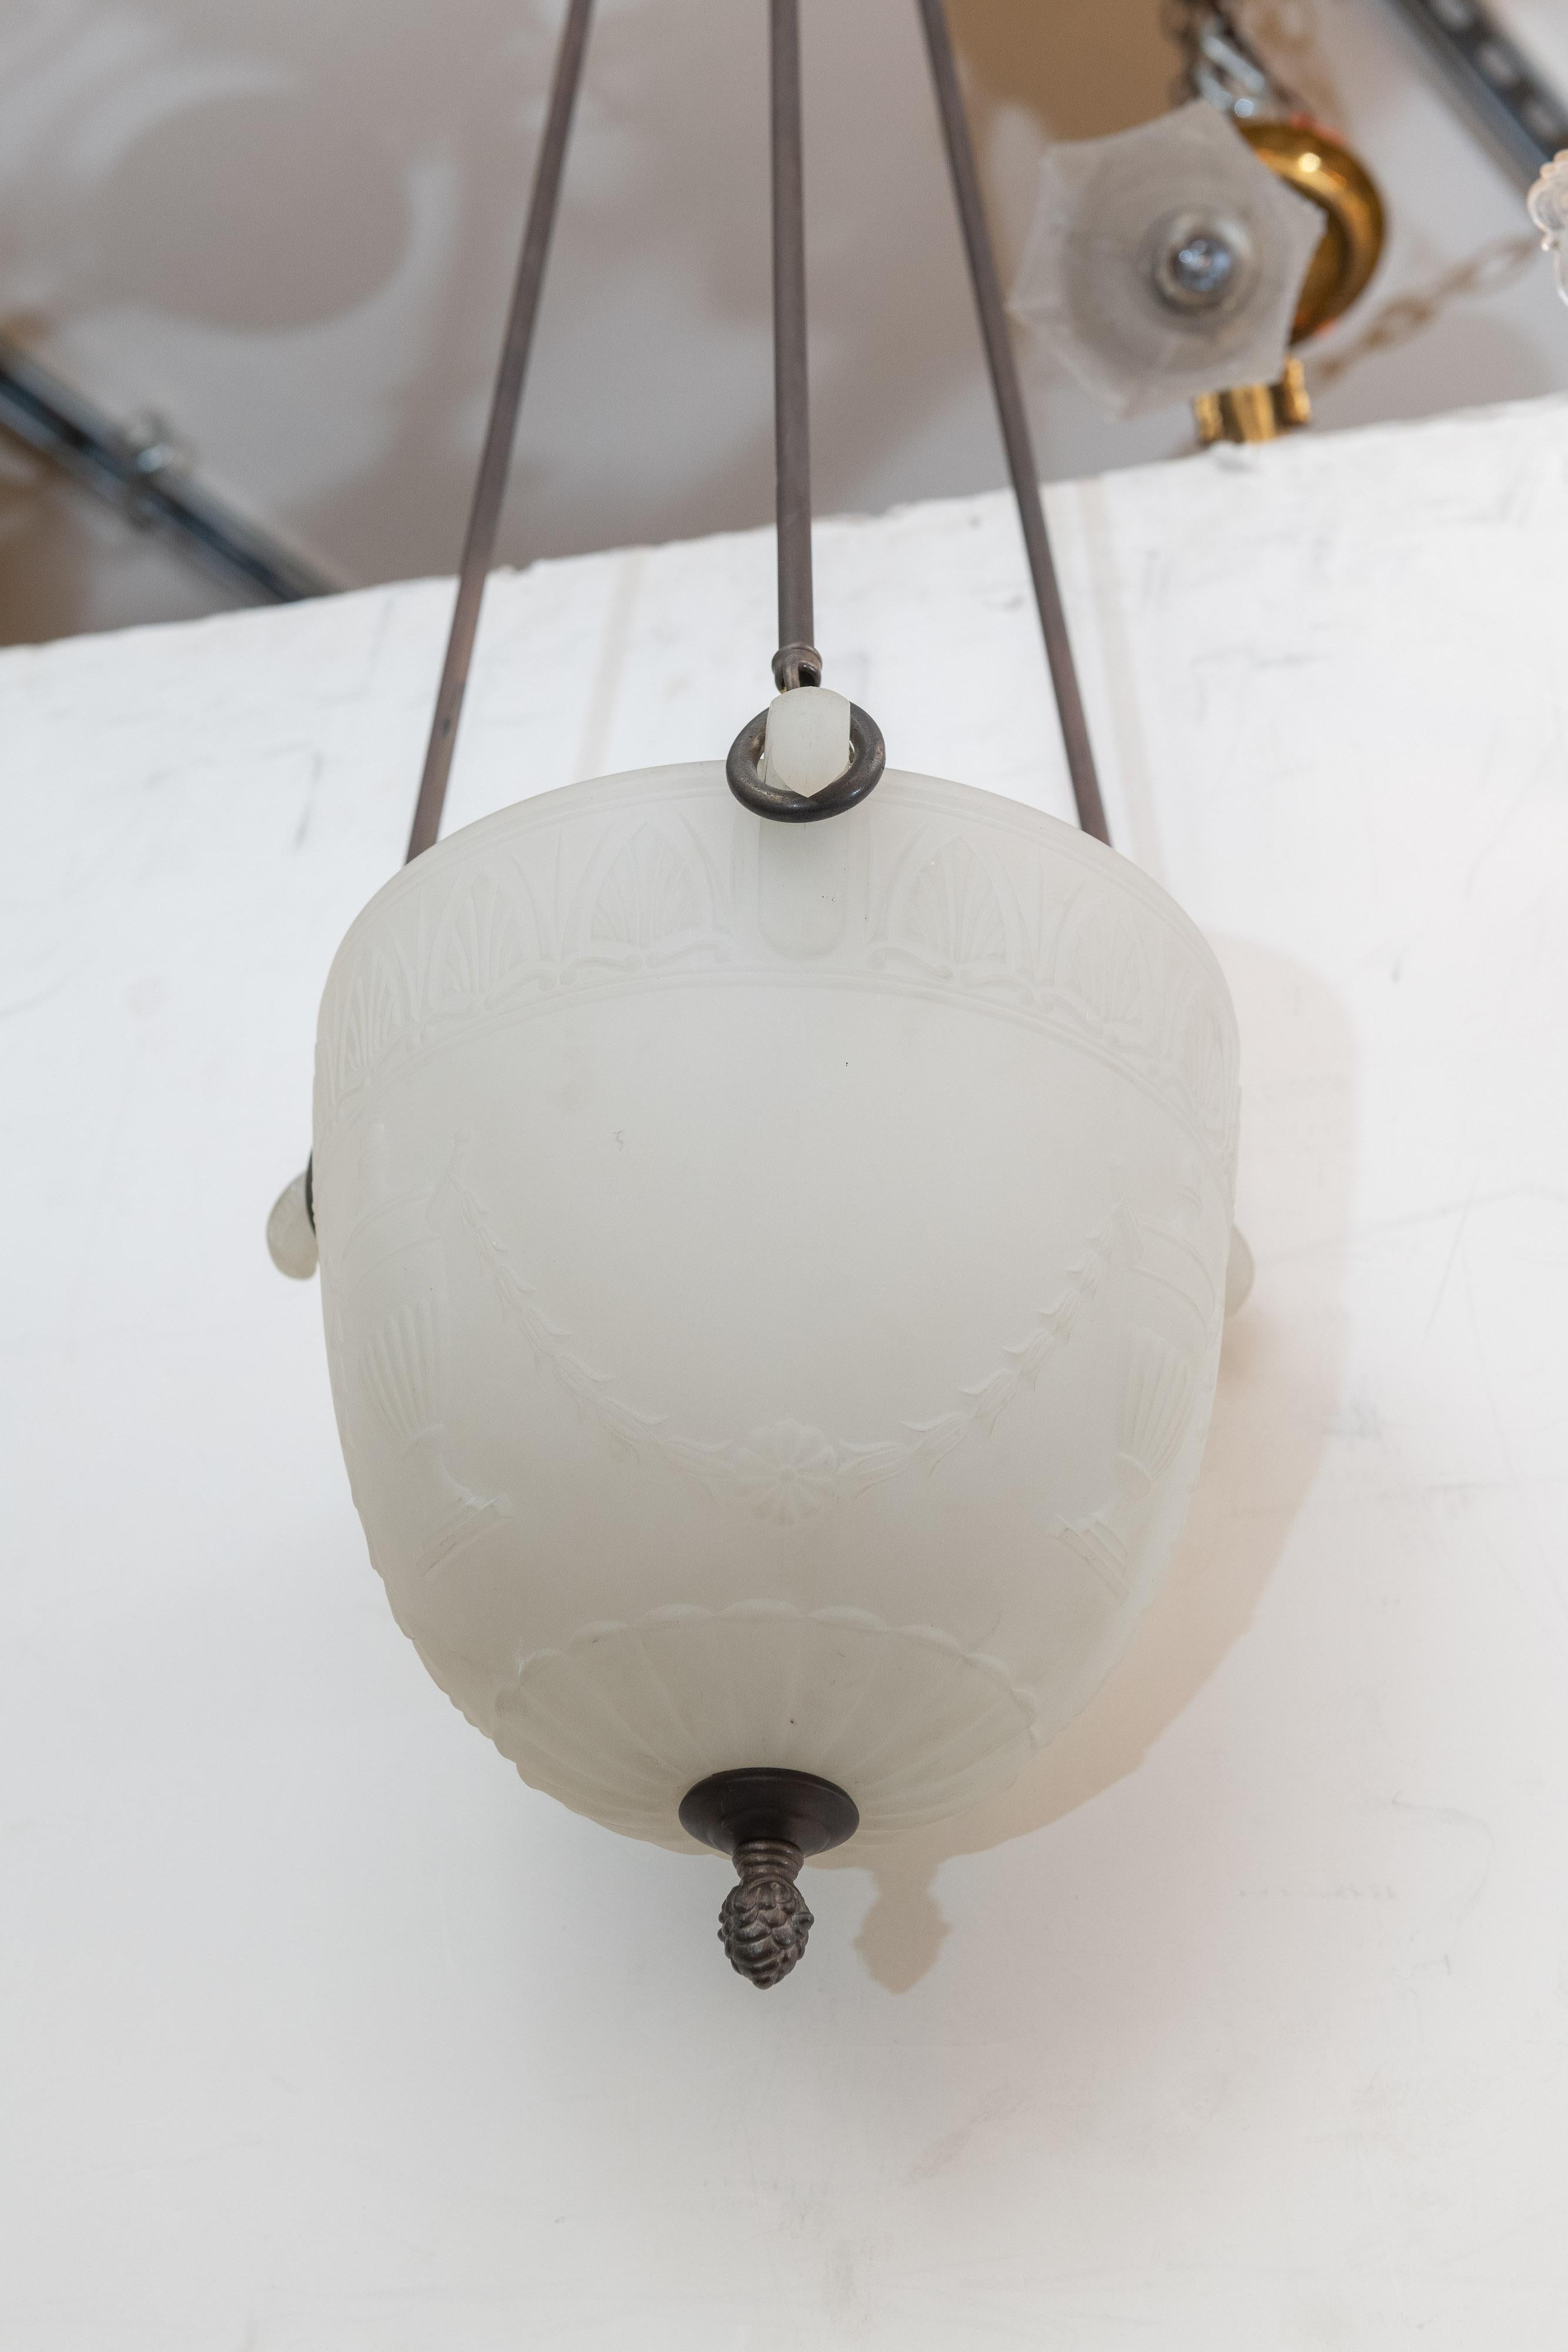 Neoclassical Revival Neoclassical Style Pendant Chandelier, circa 1920